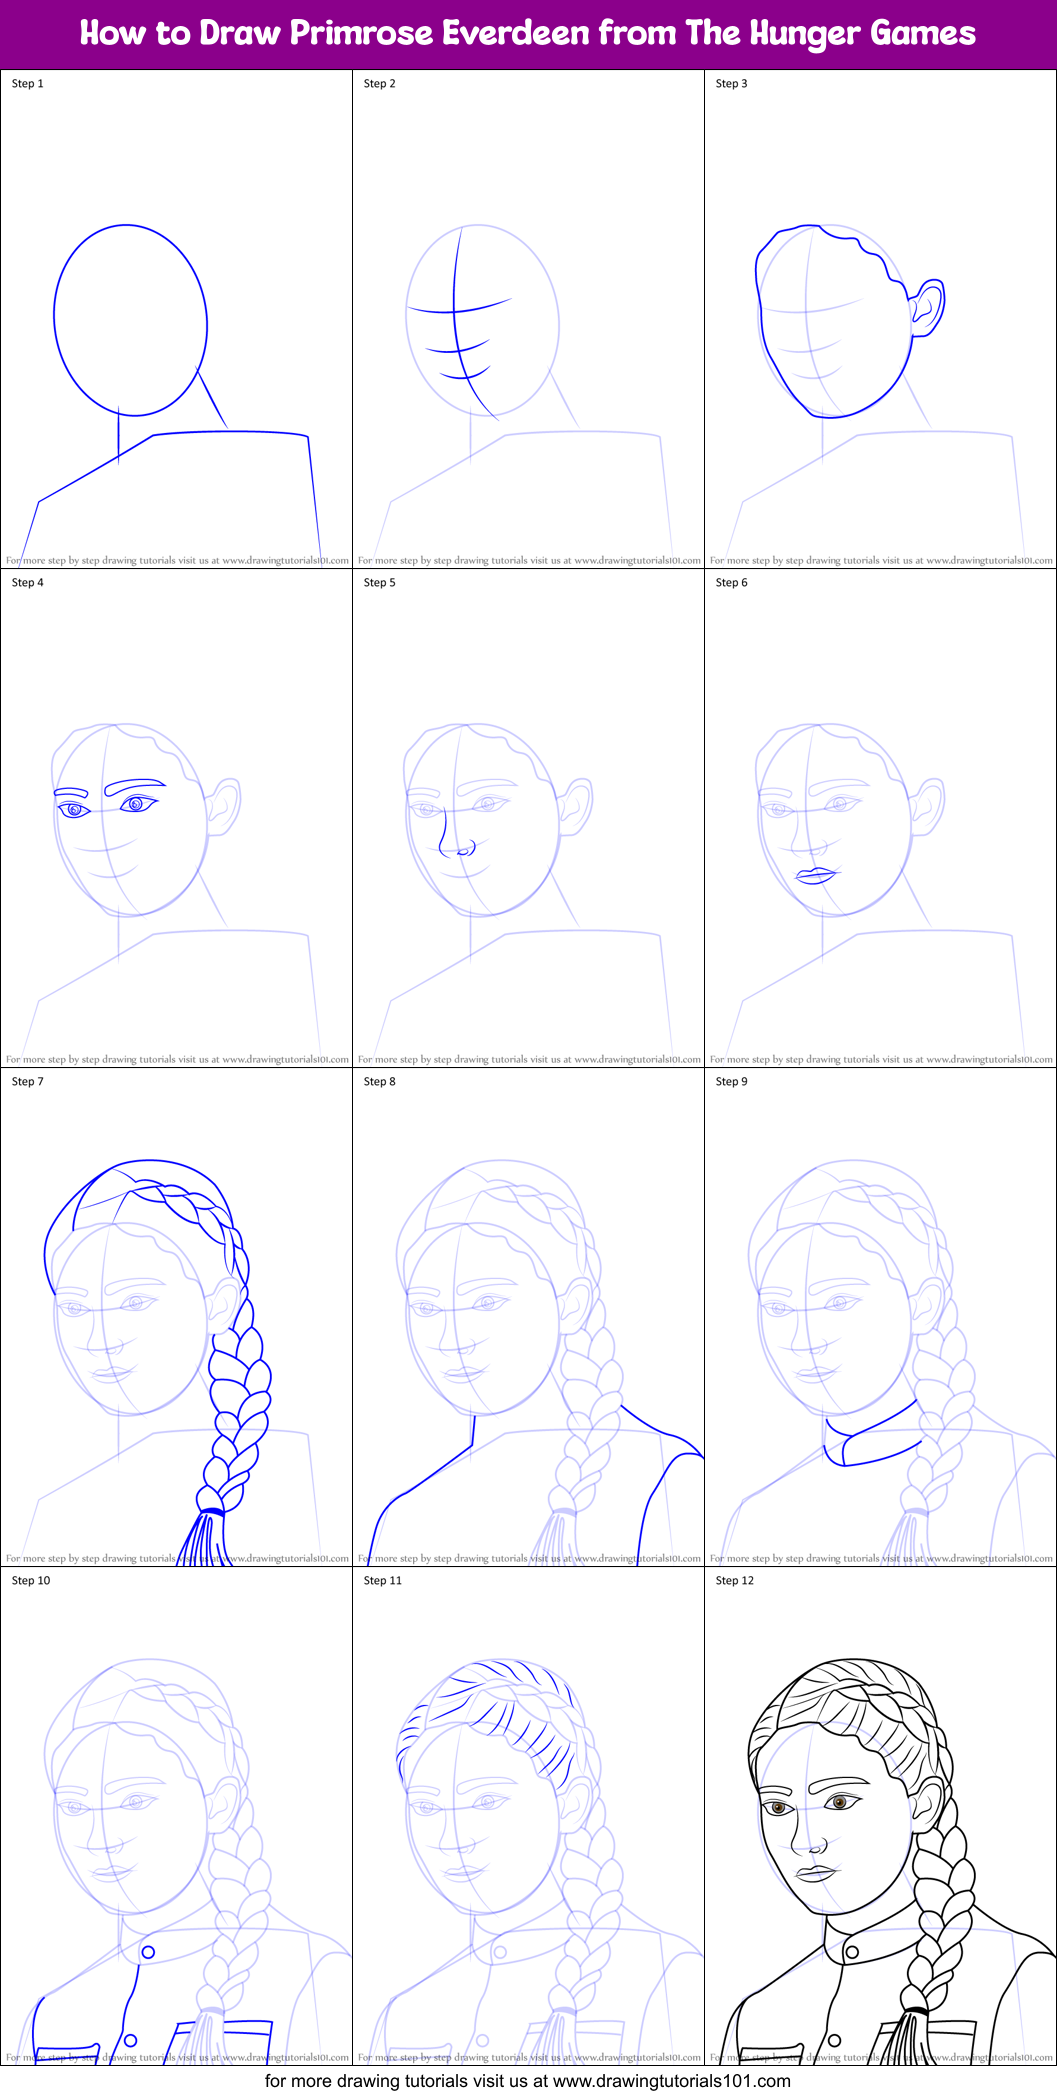 How to Draw Primrose Everdeen from The Hunger Games printable step by